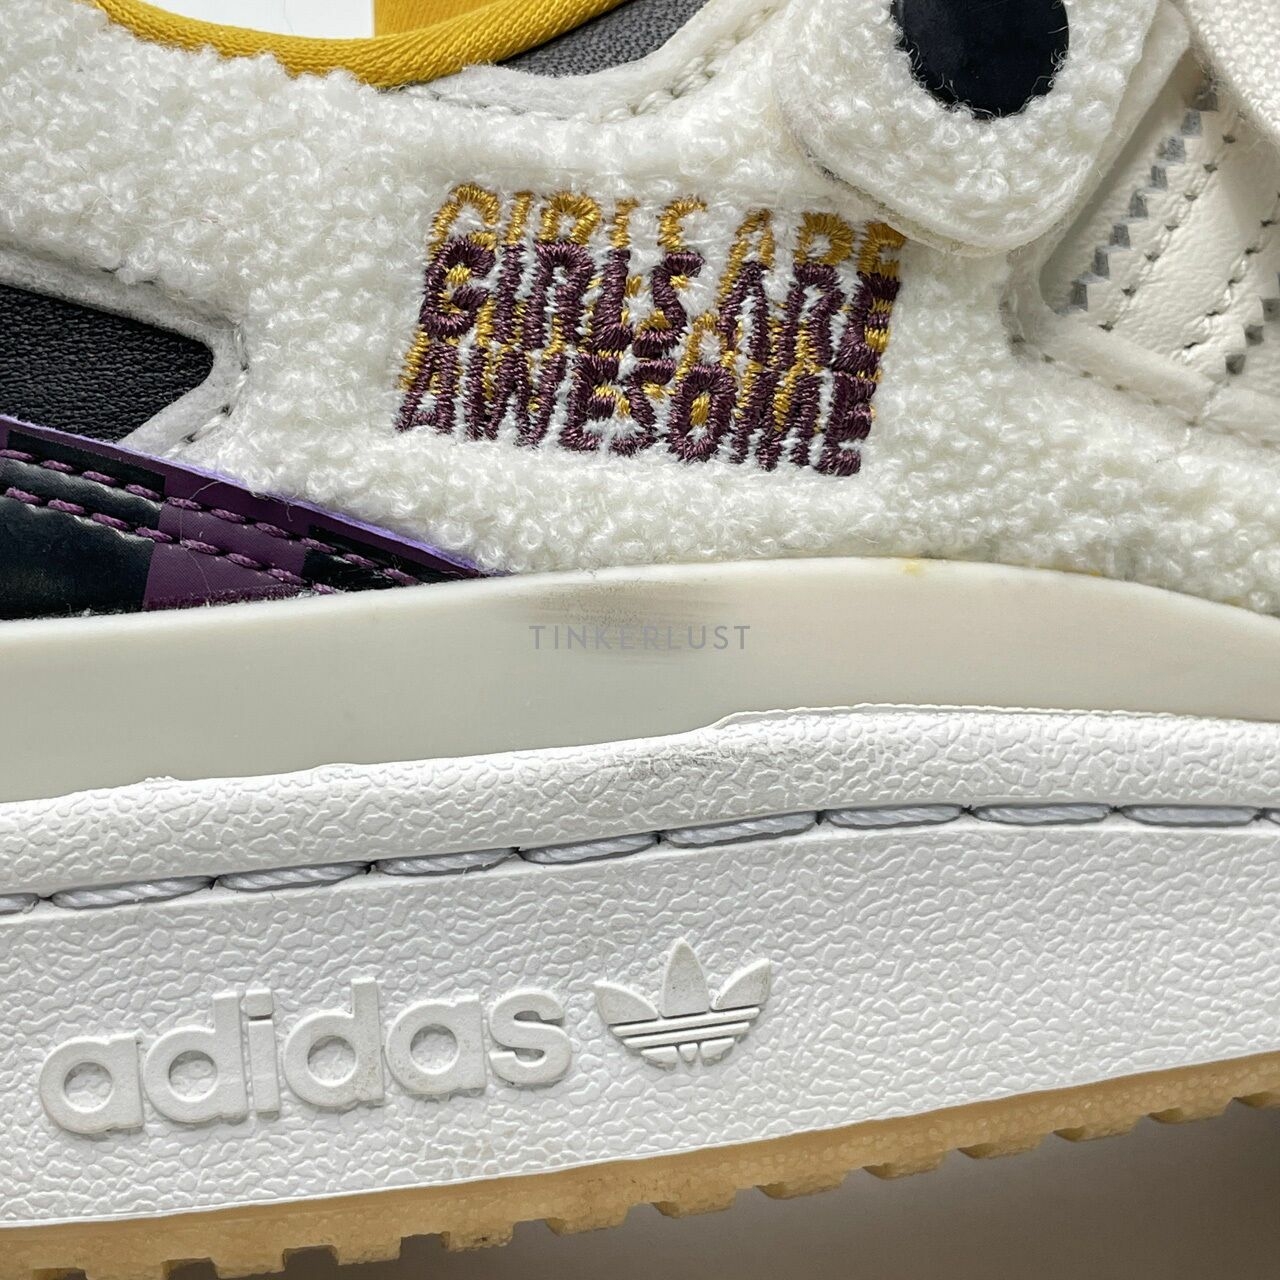 Adidas Forum Low Girls Are Awesome Sneakers